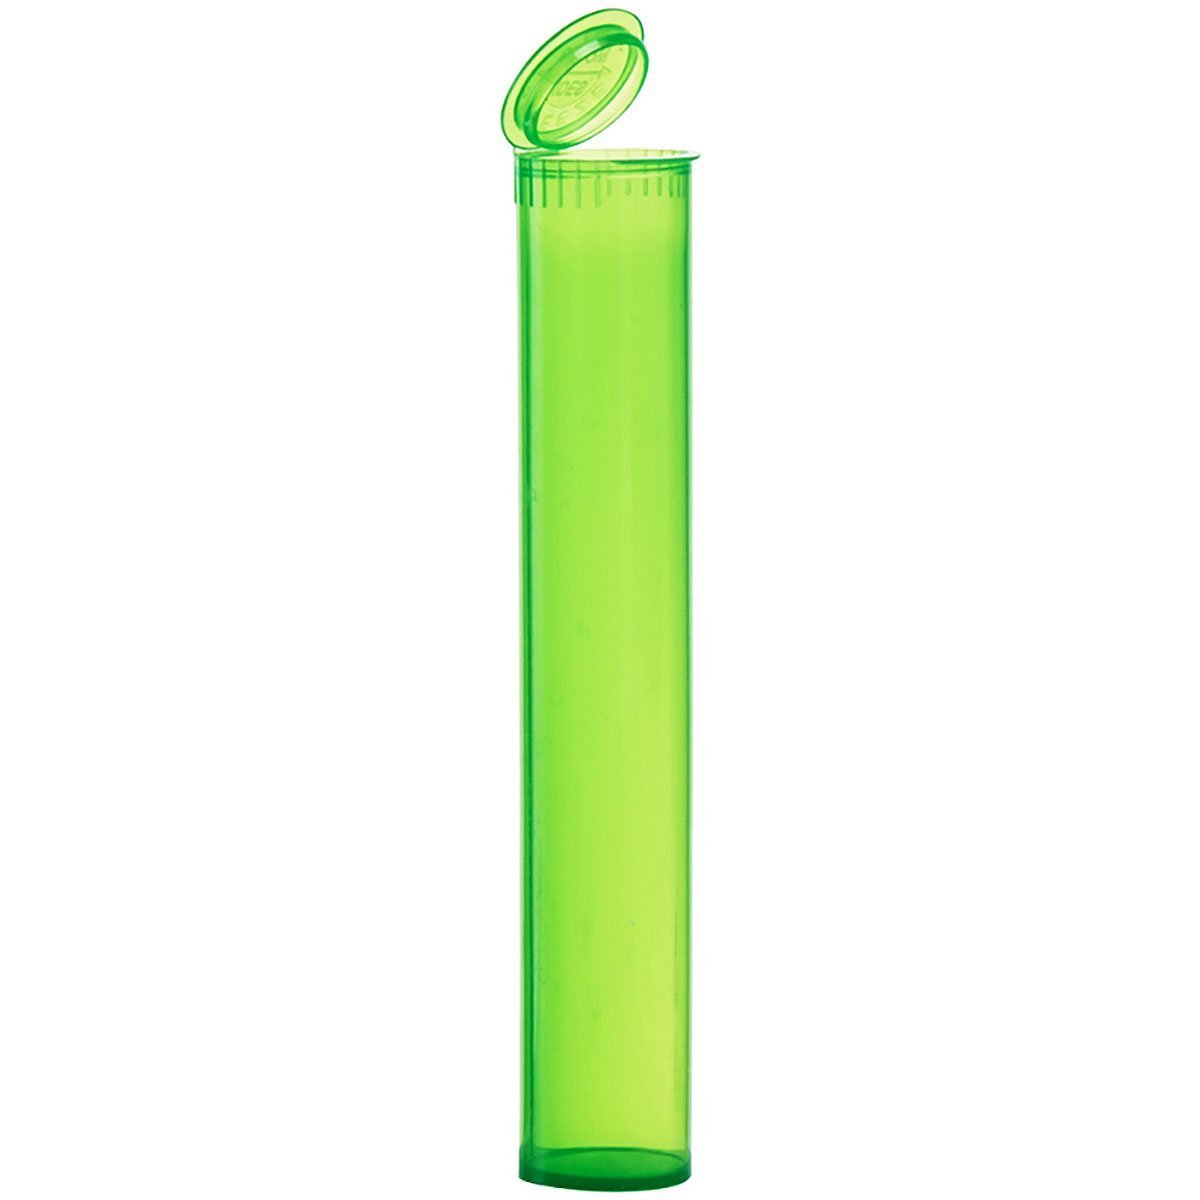 Translucent Squeeze Top Child-Resistant 94mm J-Tube Translucent Green